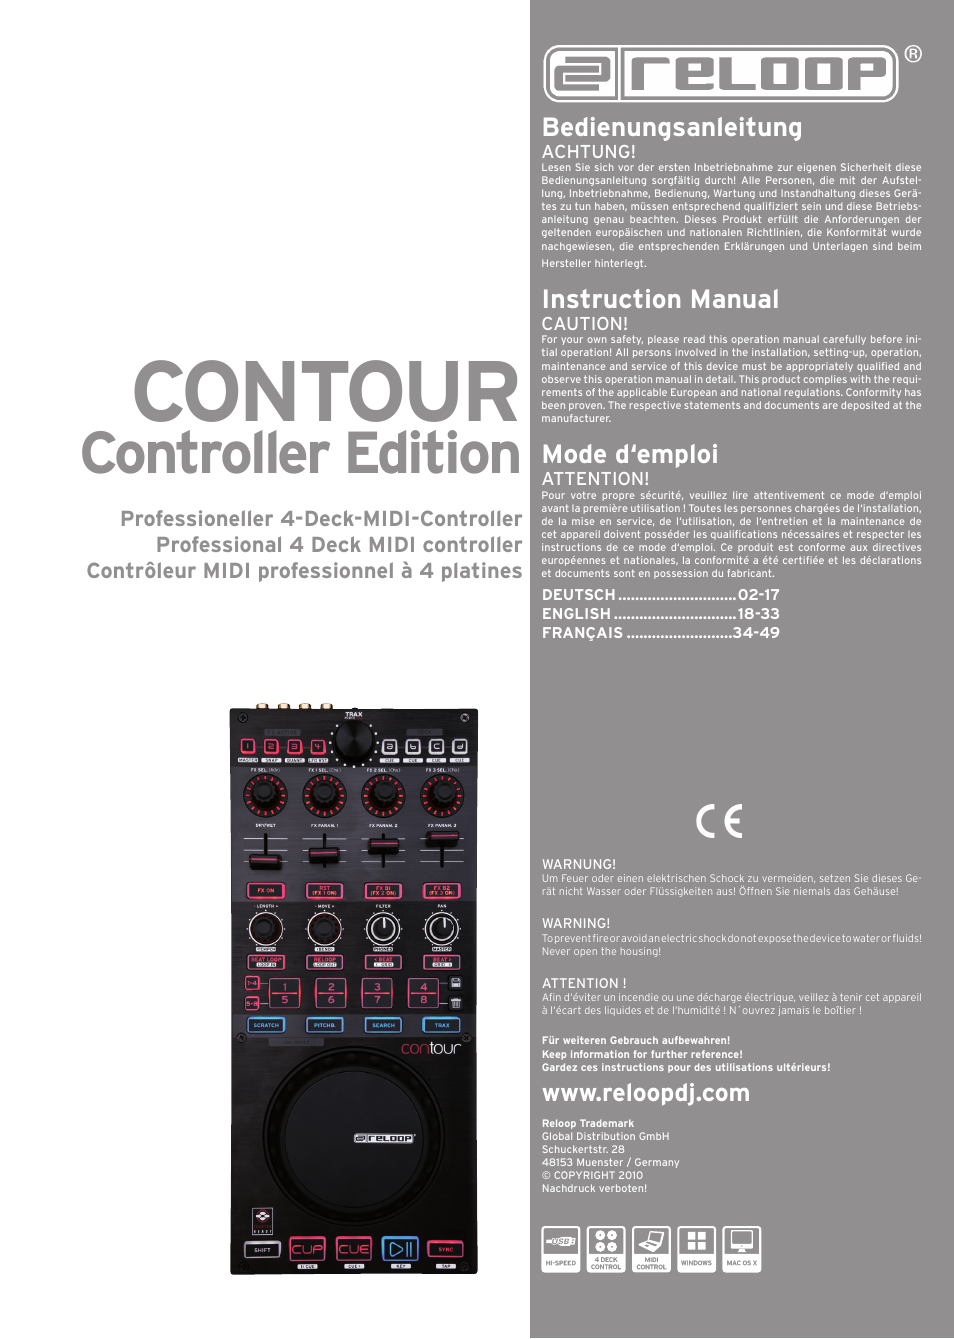 Reloop CONTOUR CONTROLLER EDITION User Manual | 52 pages